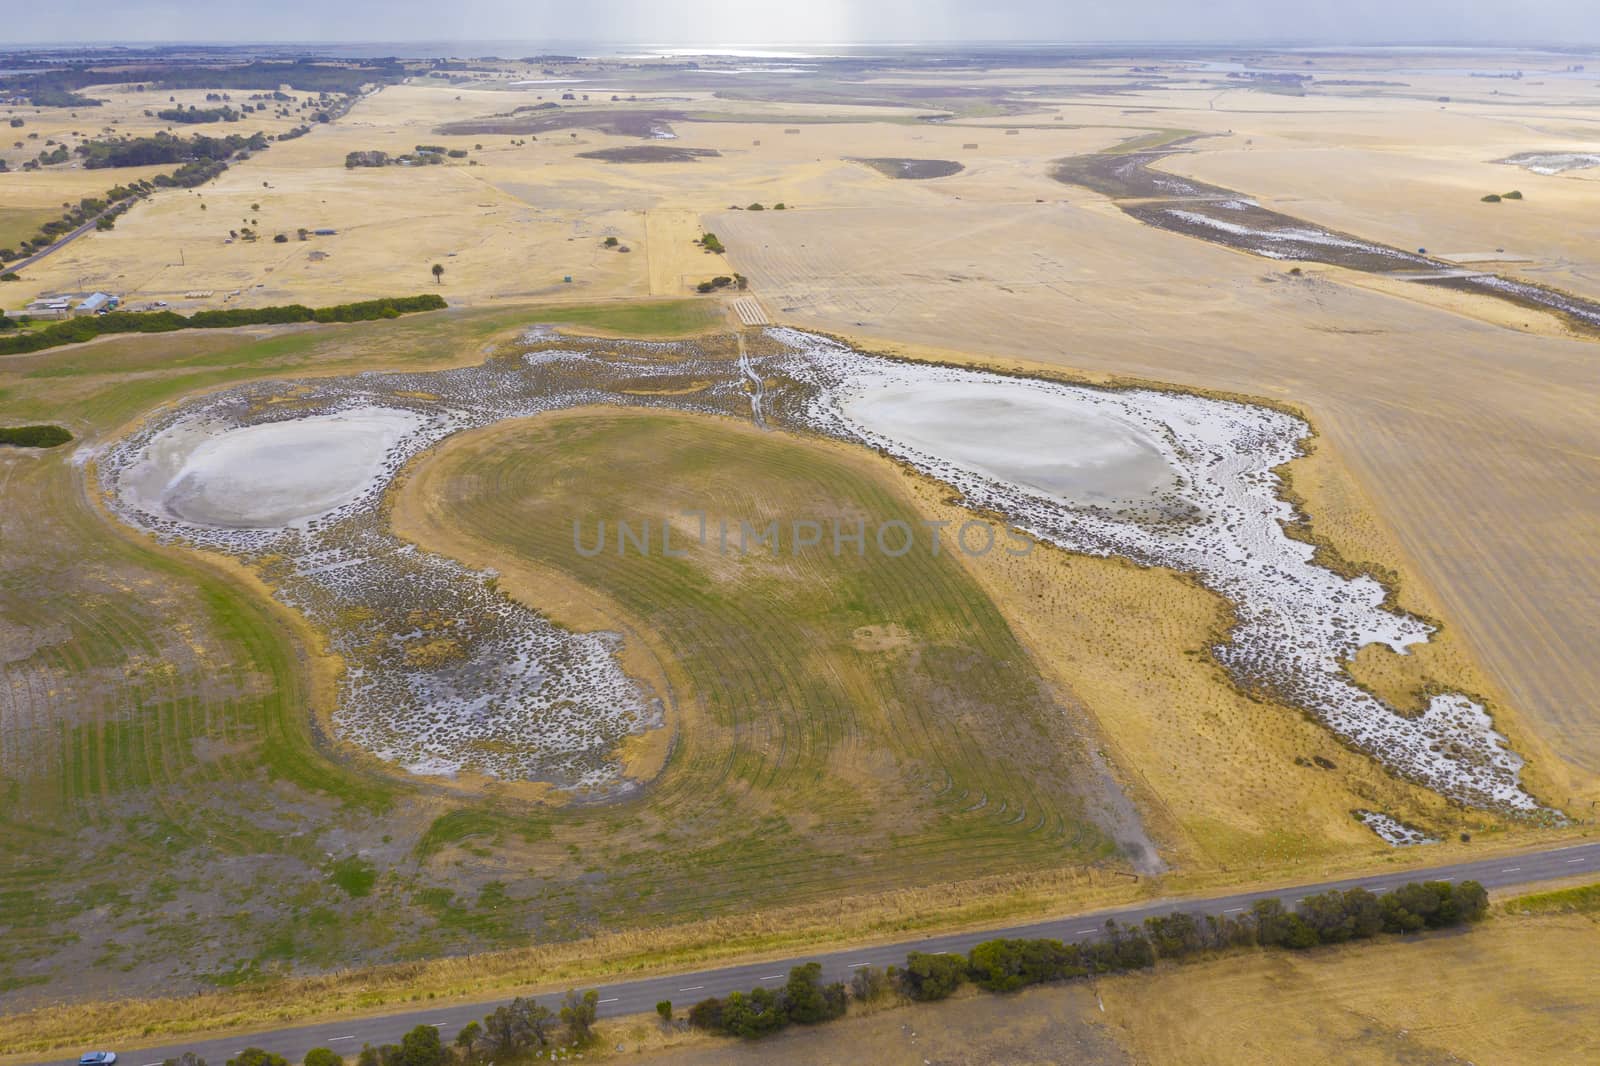 Aerial view of an irrigation dam affected by severe drought in regional Australia